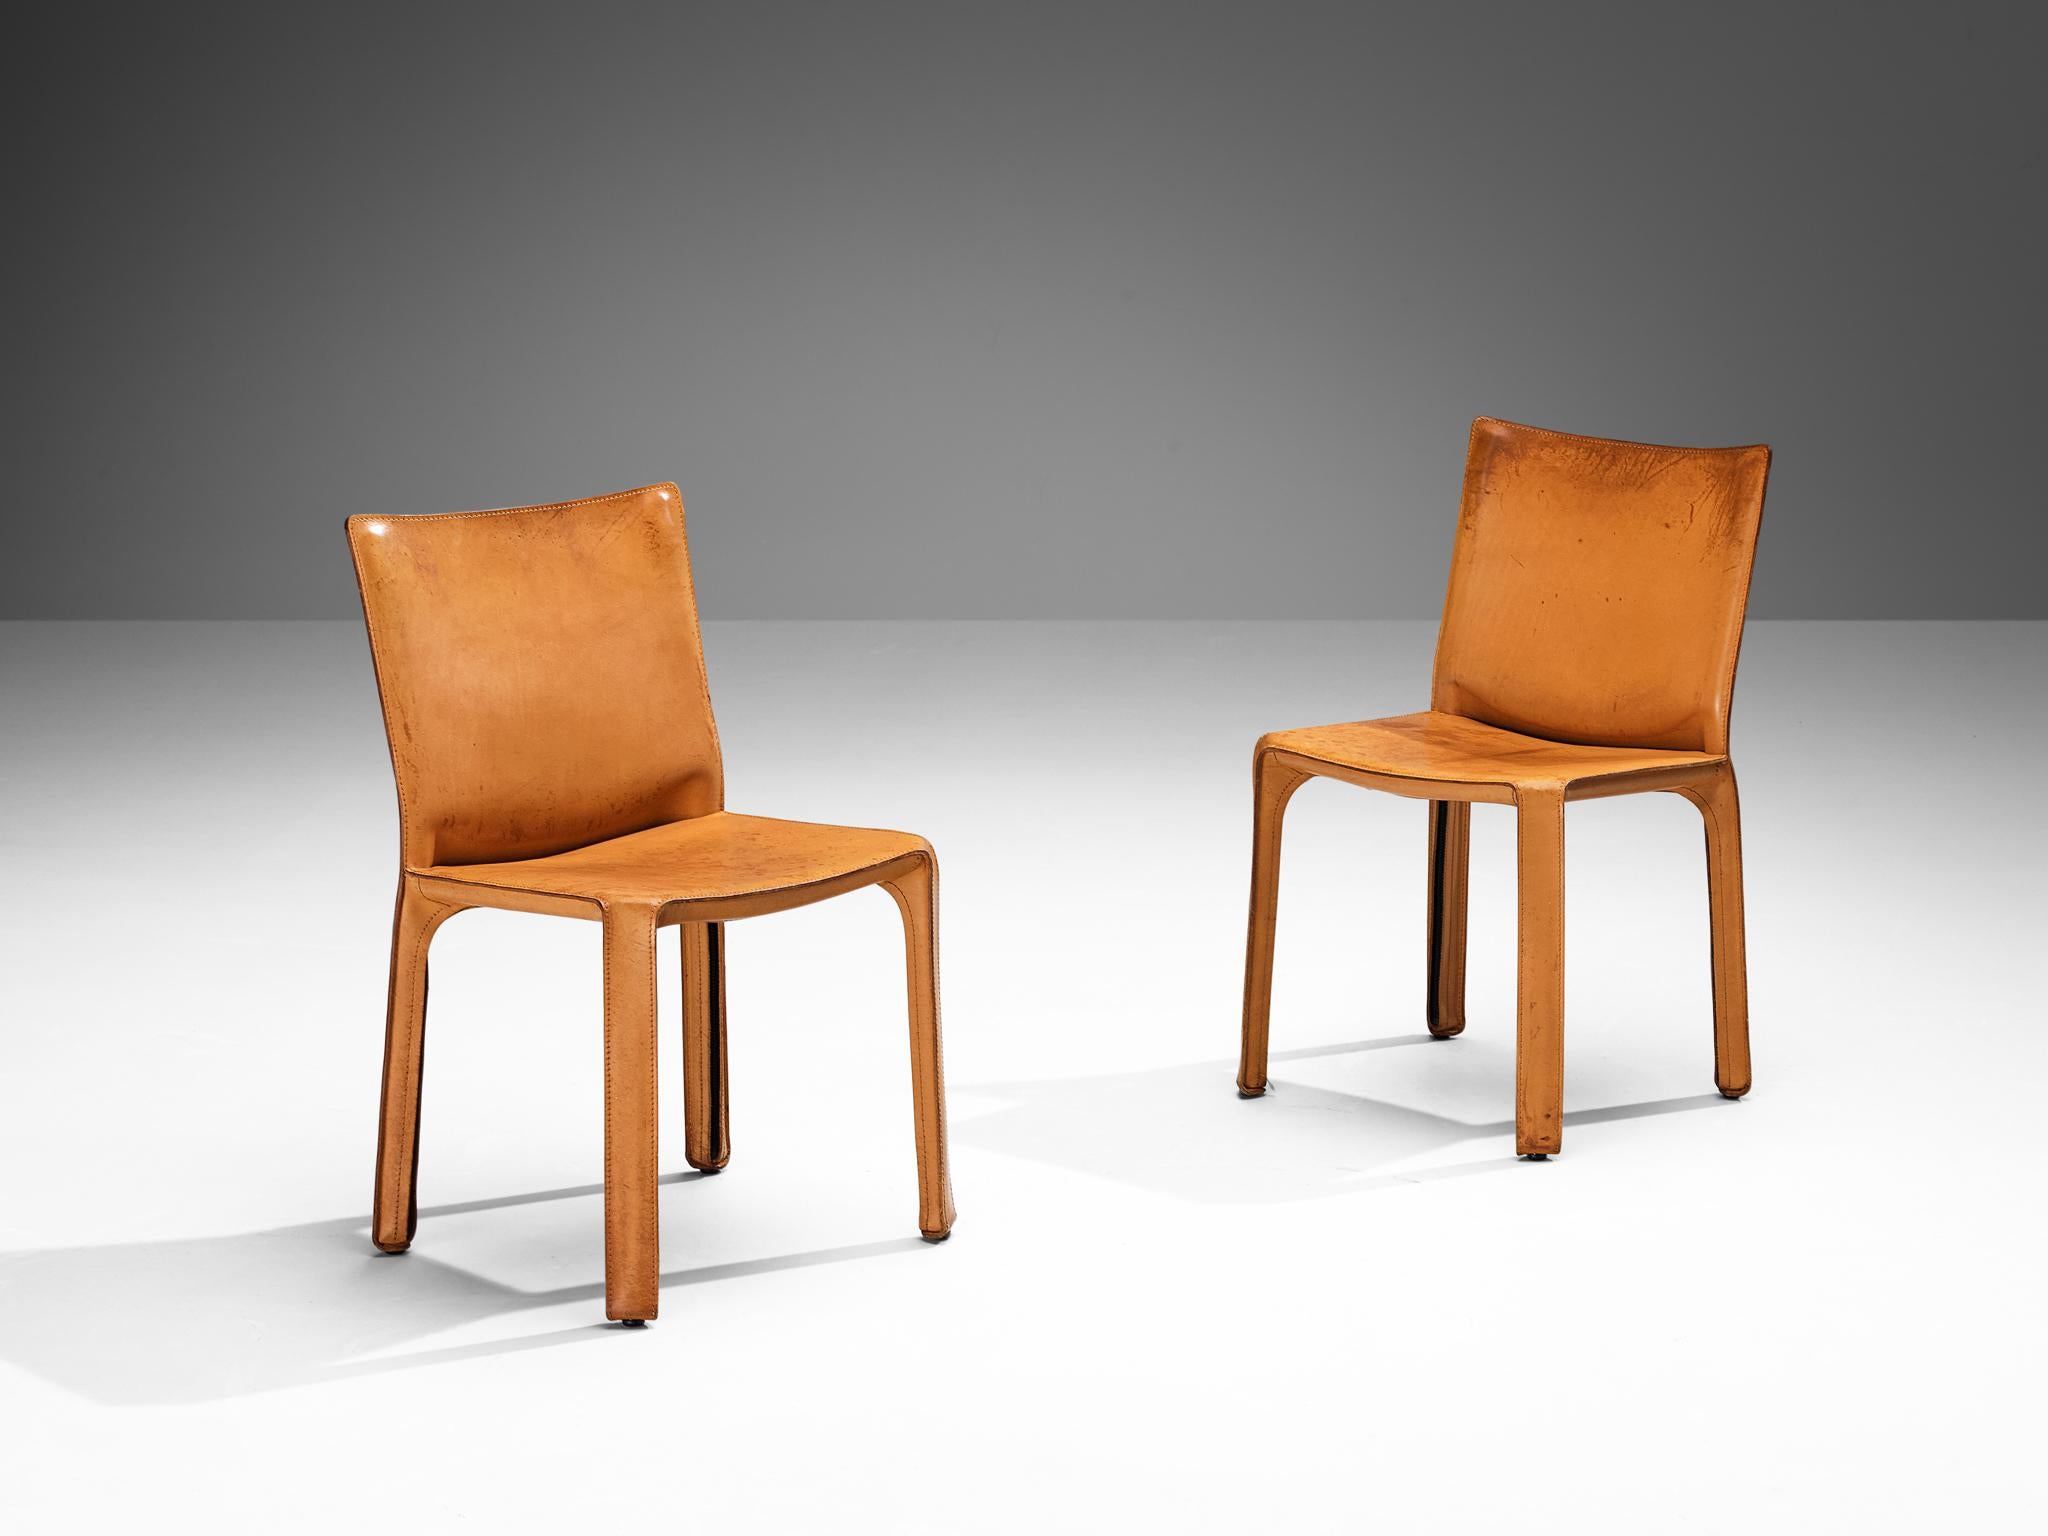 Mario Bellini for Cassina, pair of 'cab' dining chairs, model 412, cognac leather, steel, Italy, 1976

Beautiful pair of dining chairs executed in patinated cognac leather designed by Mario Bellini for Cassina. Conceptually, the chair was designed